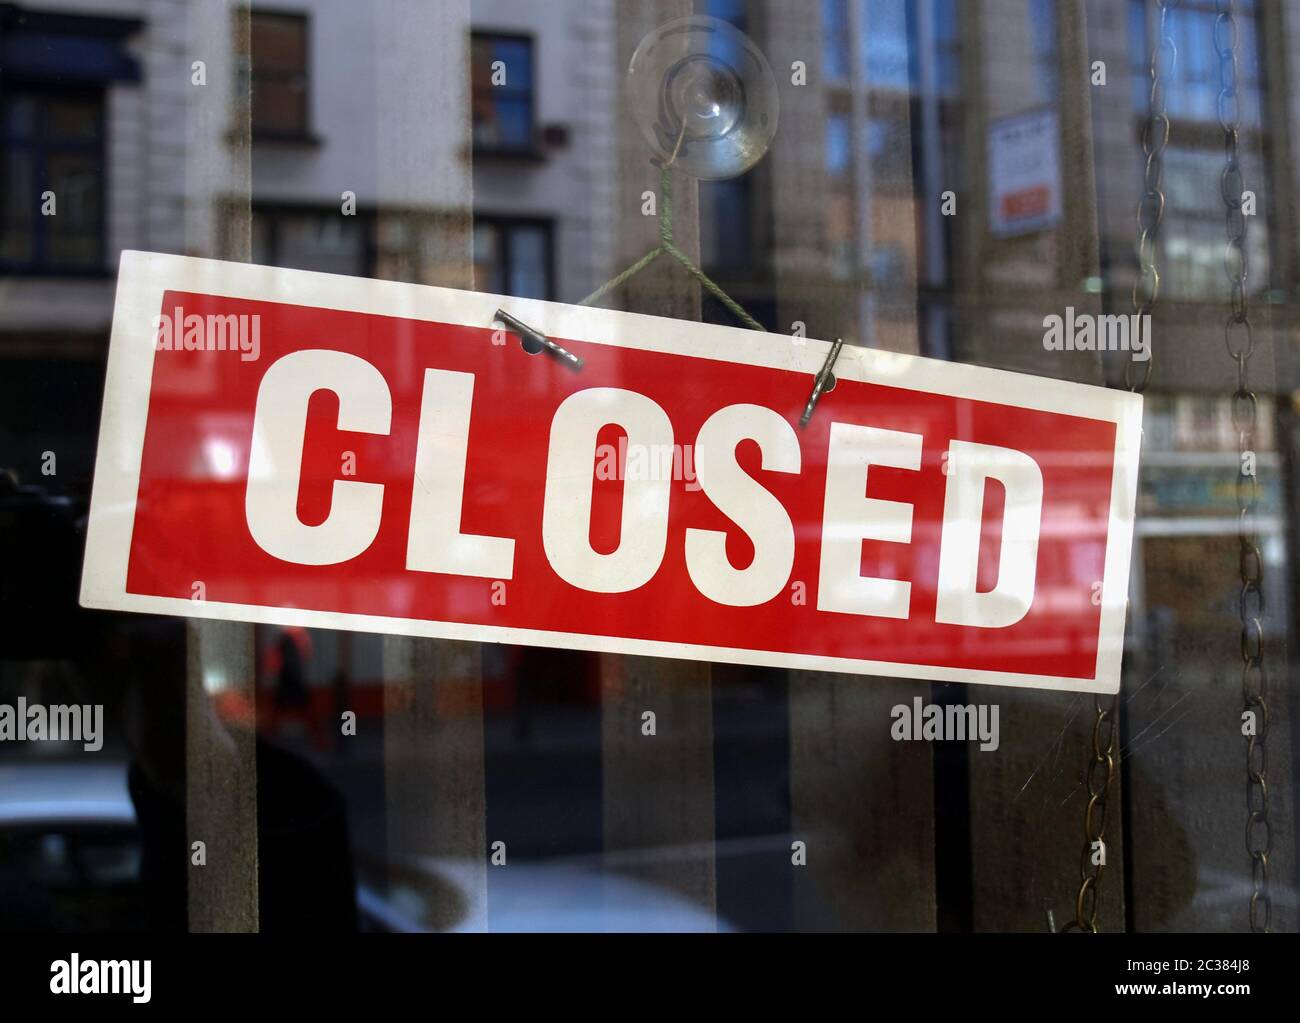 Closed sign a in shop window with blurred background reflections Stock Photo